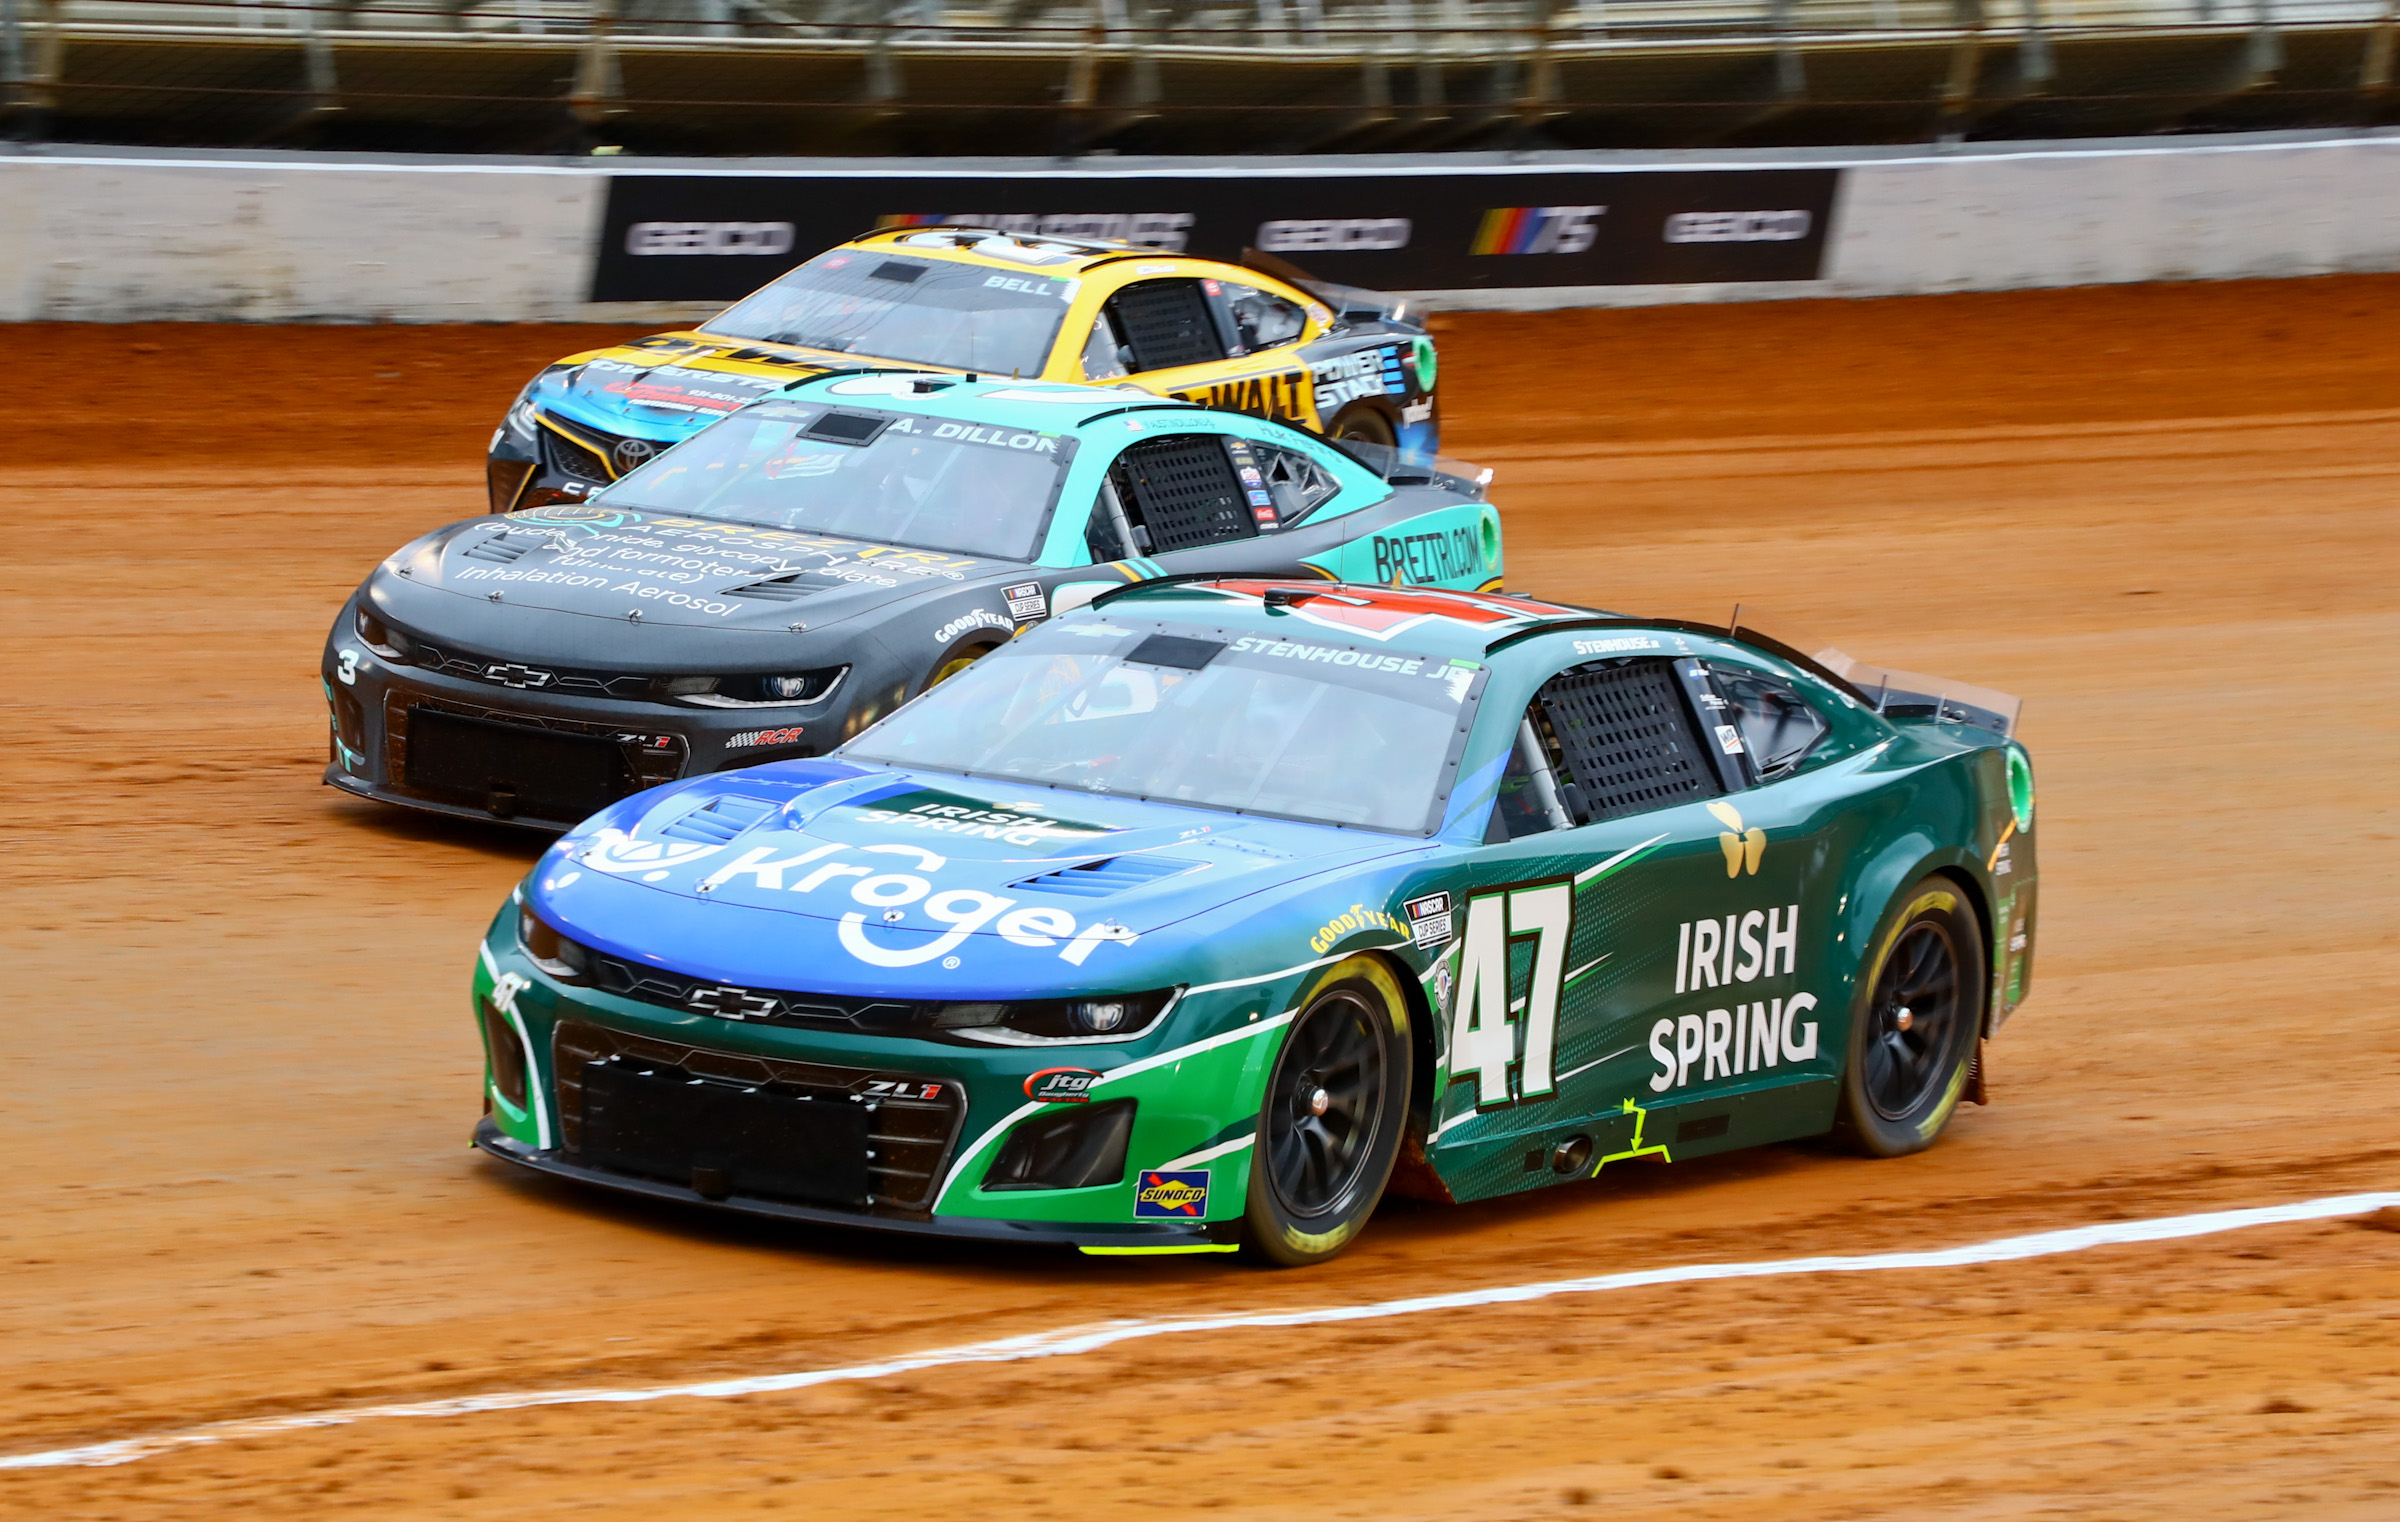 Many drivers weigh in on the Bristol dirt debate